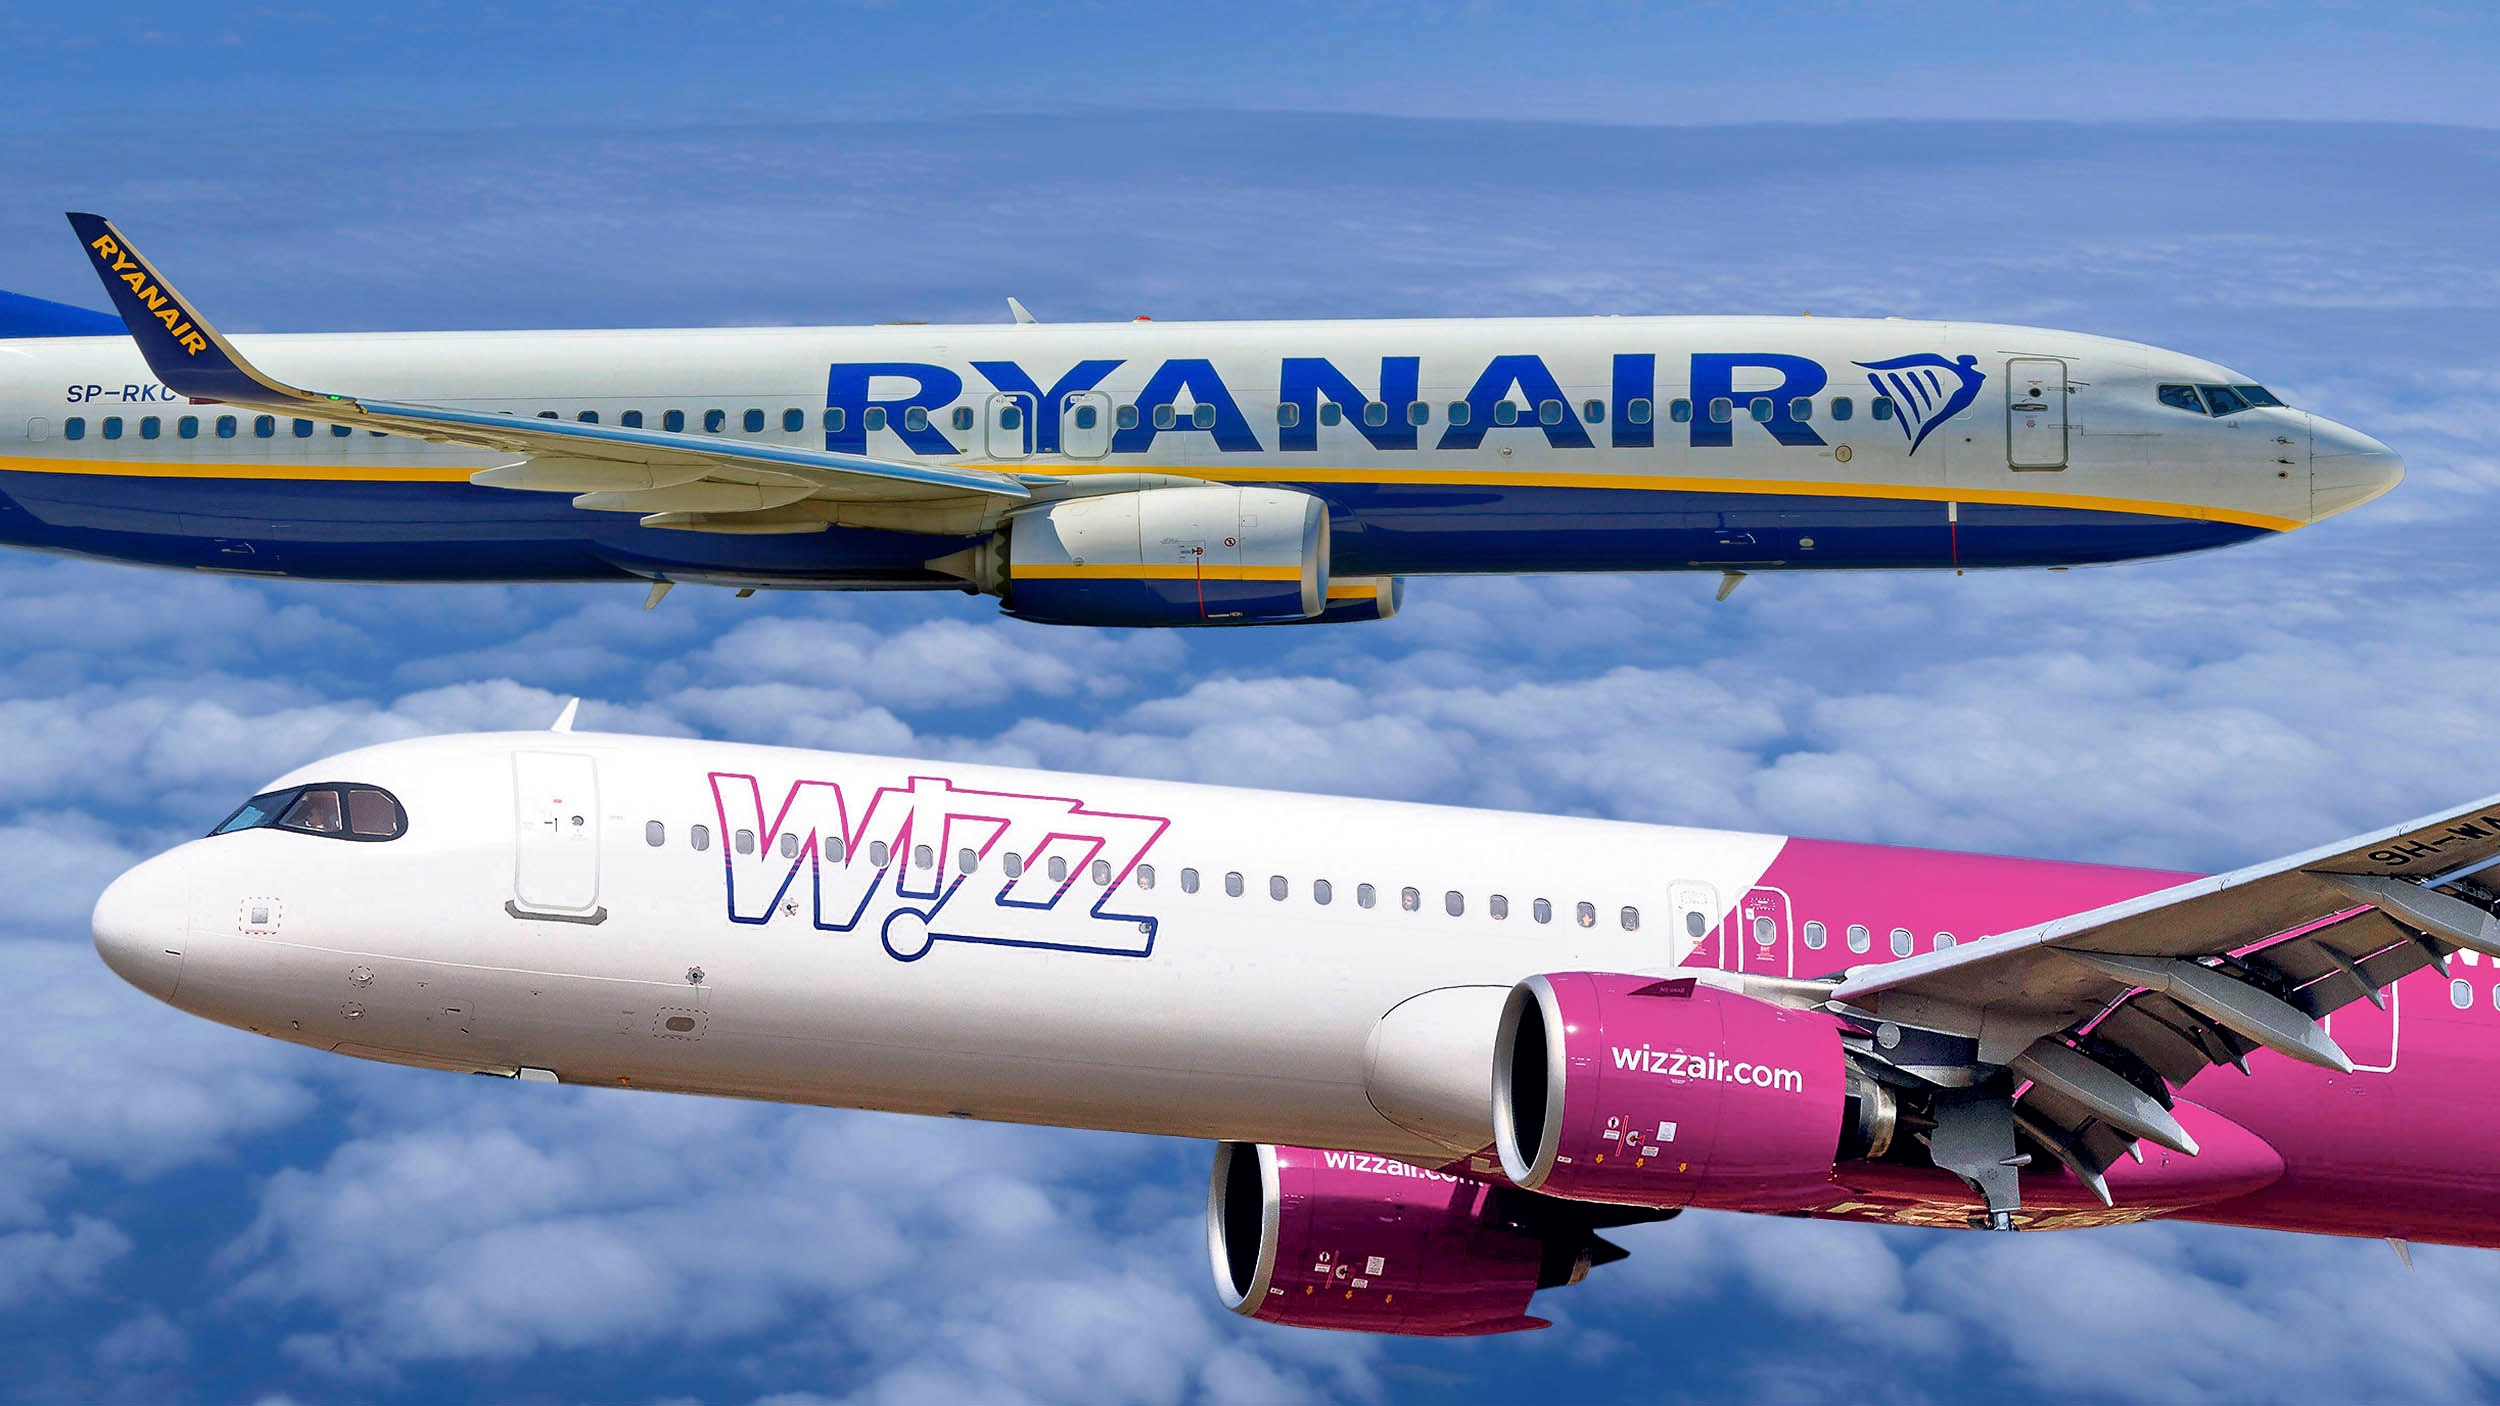 Wizz, launched in 2004, was initially a Ryanair imitator